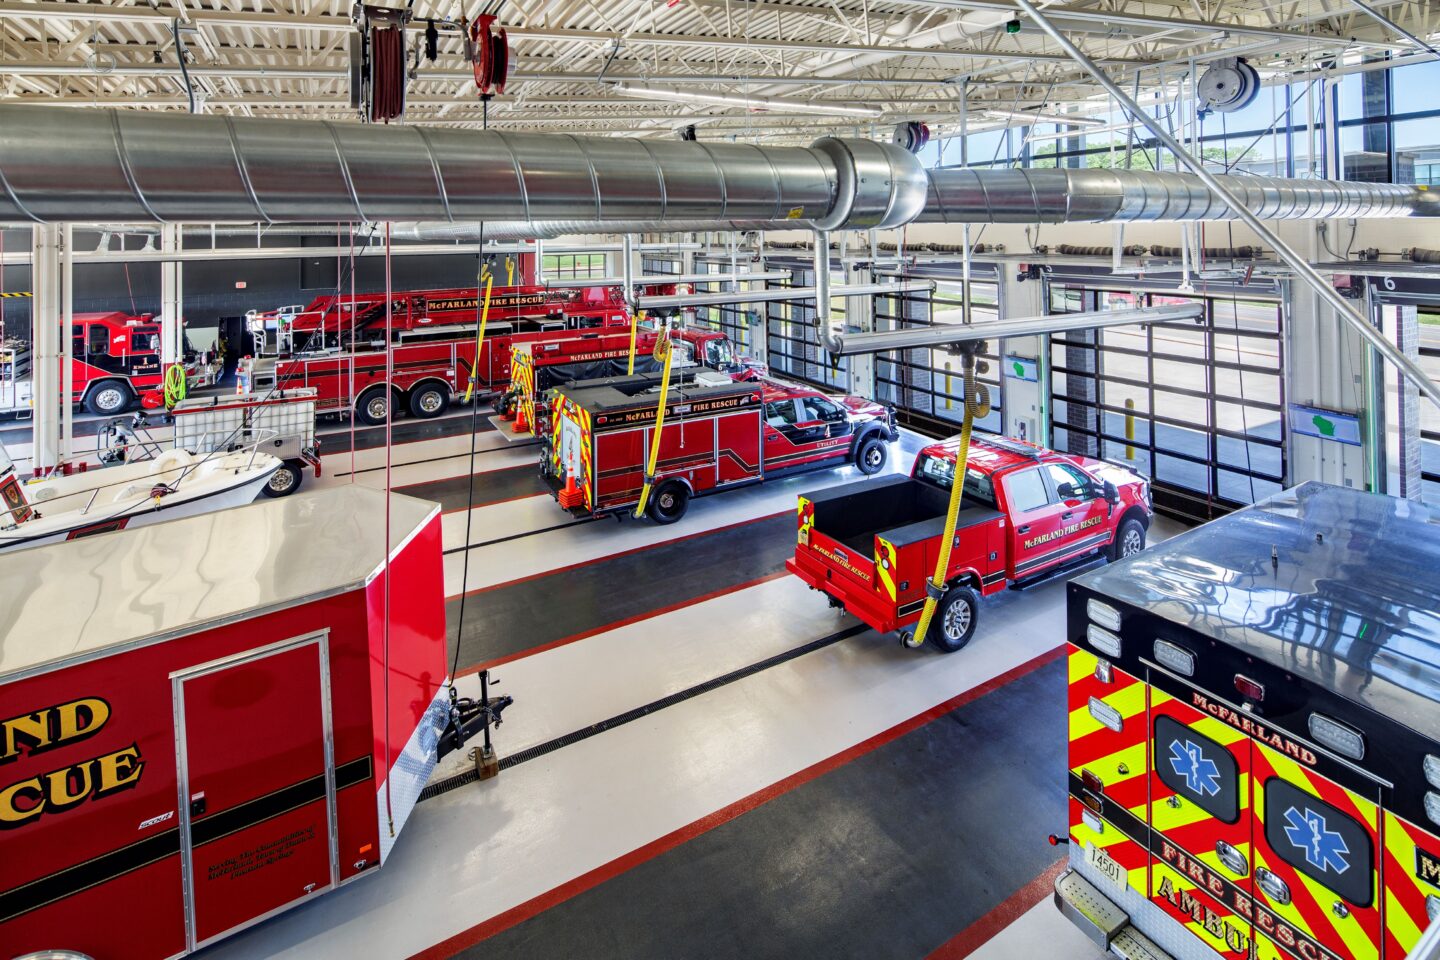 Apparatus Bay with all FD vehicles and doors closed